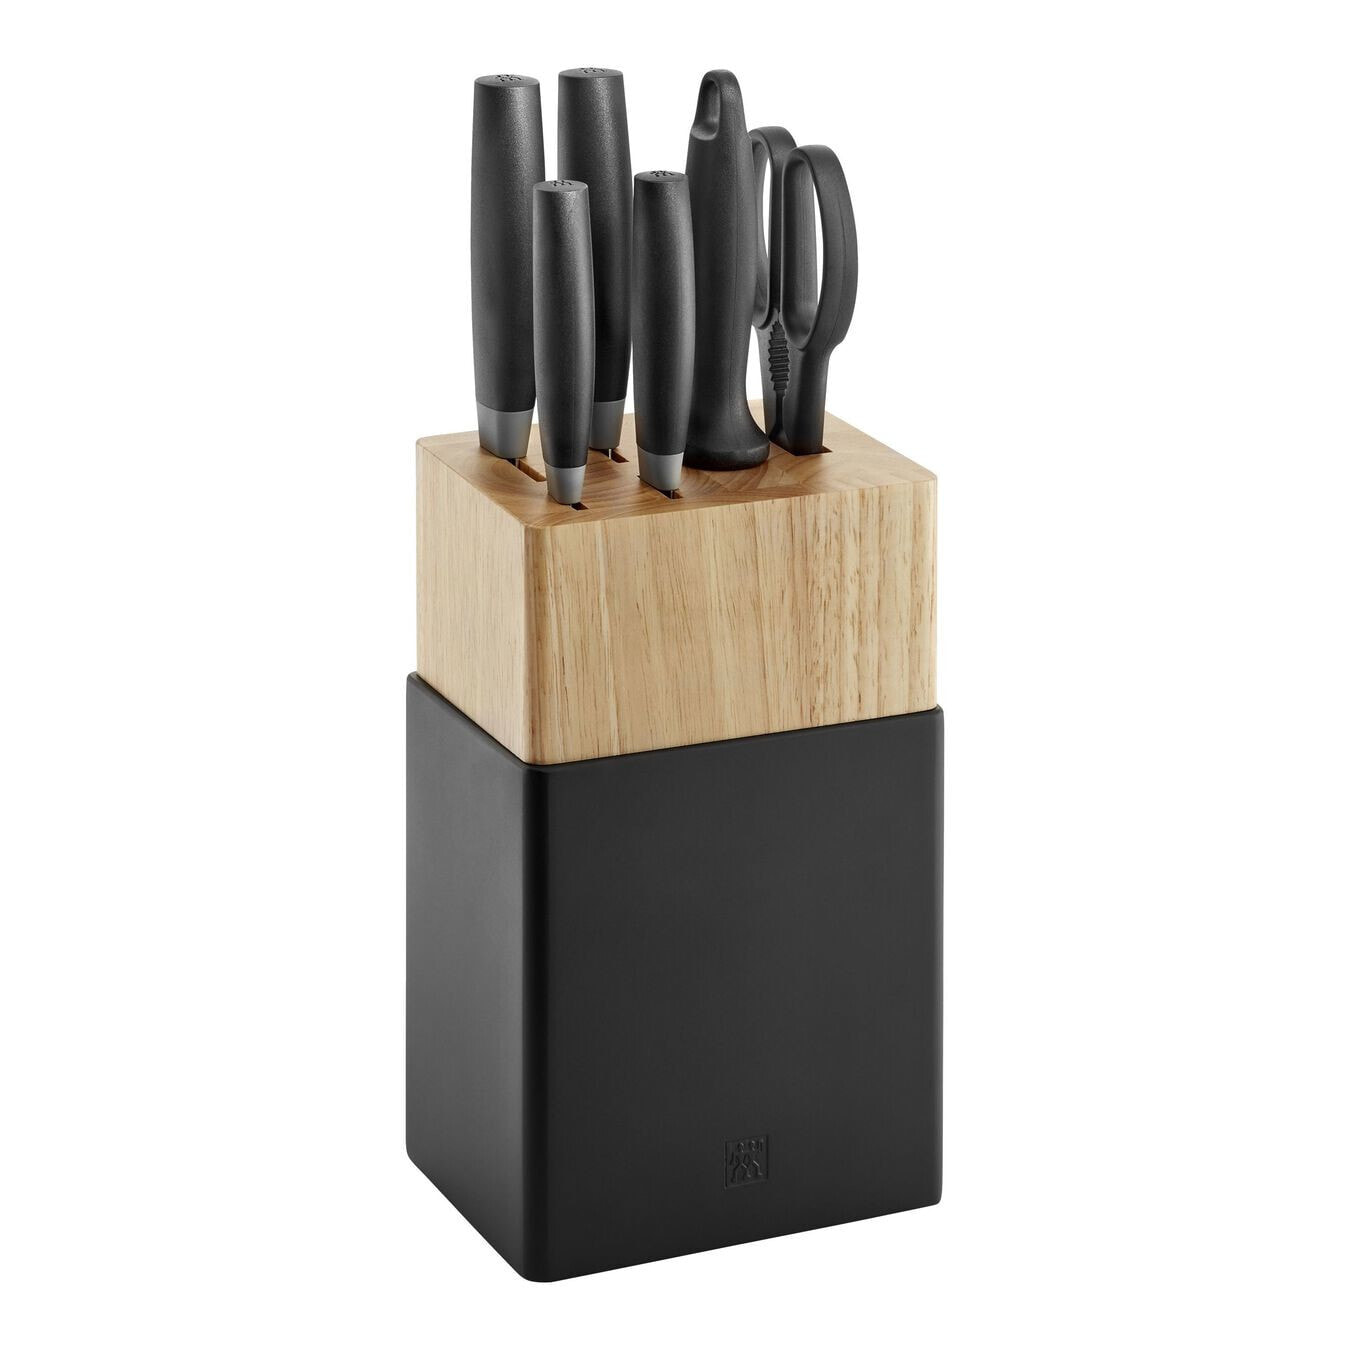 Zwilling NOW S - Knife/cutlery block set - Stainless steel - Plastic - 1 tools - Knife sharpener - Stainless steel